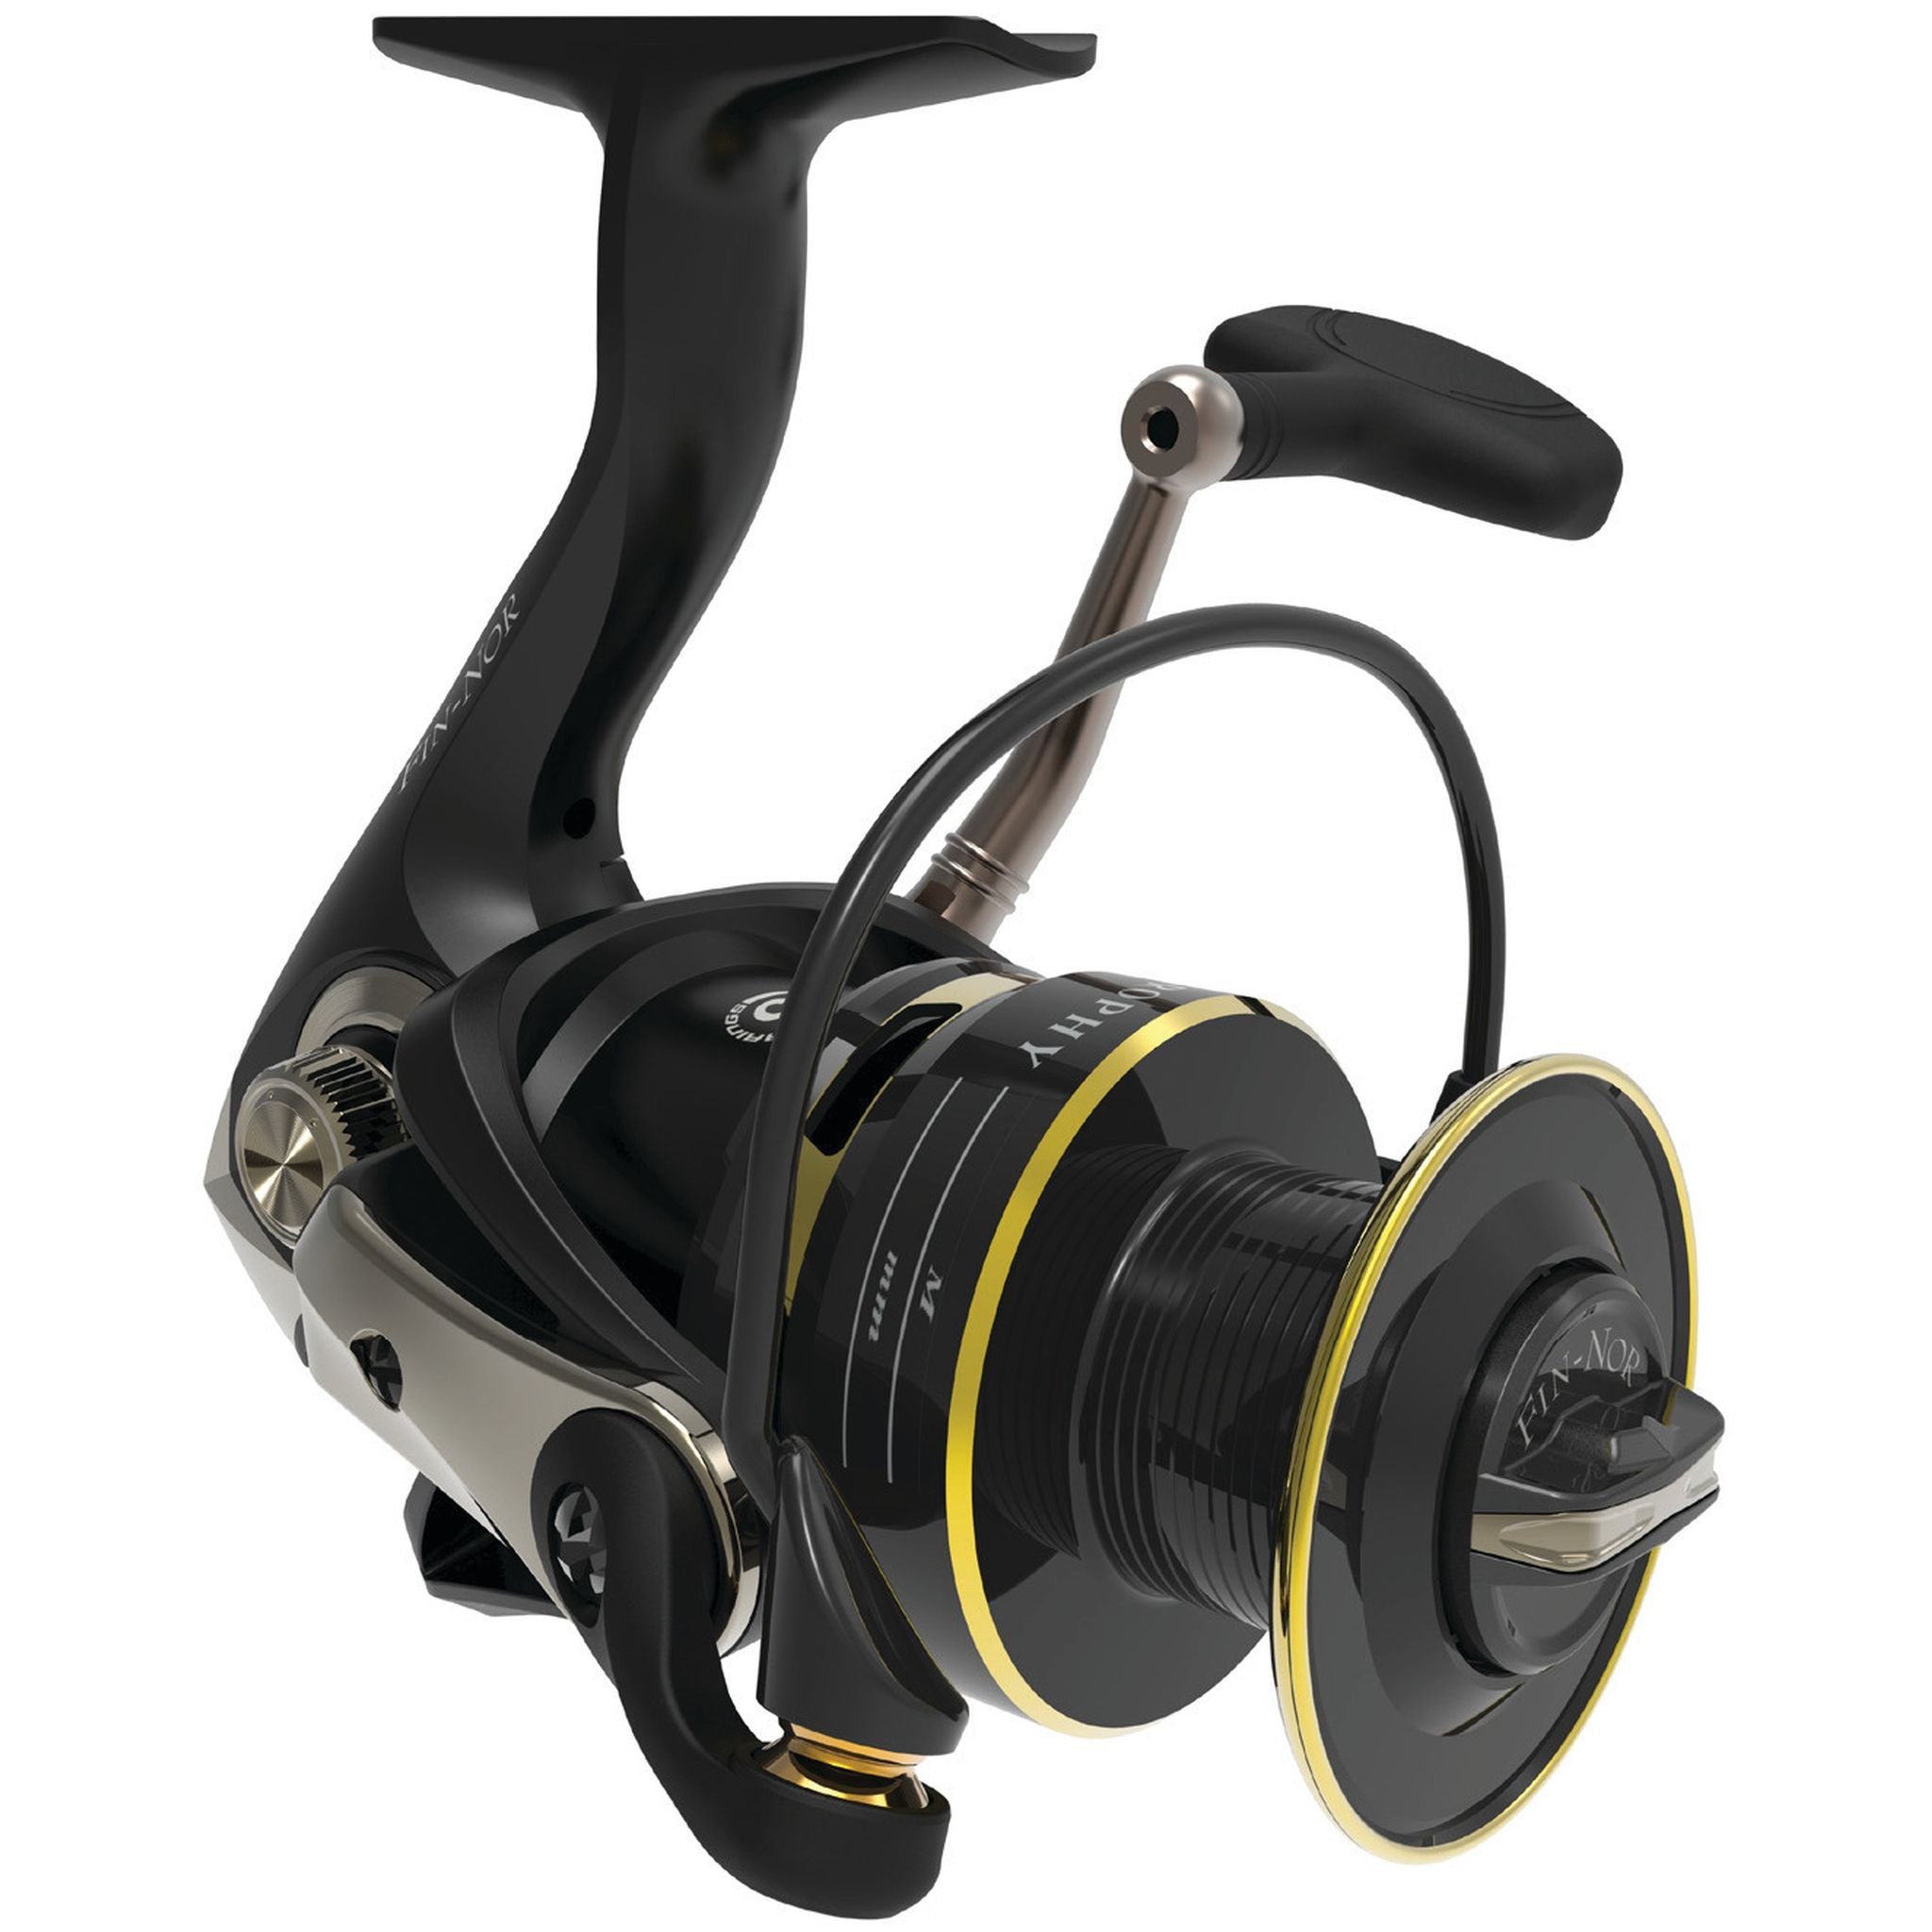 Fin-Nor Trophy TRO30 Spinning Fishing Reel